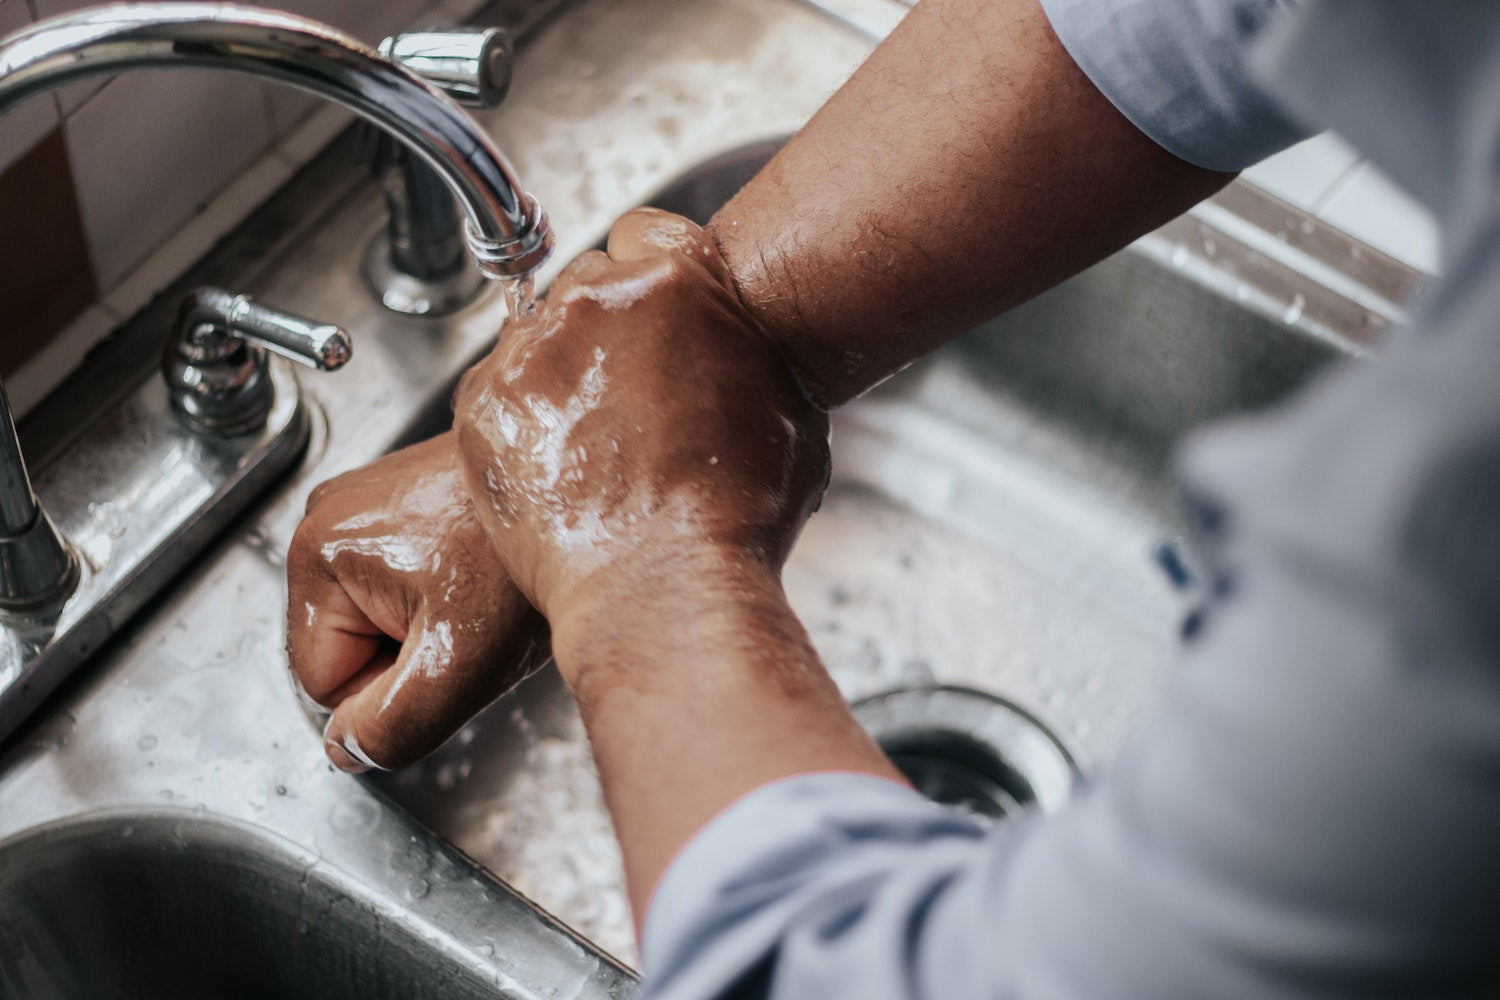 How Washing Your Hands Keeps You Healthy